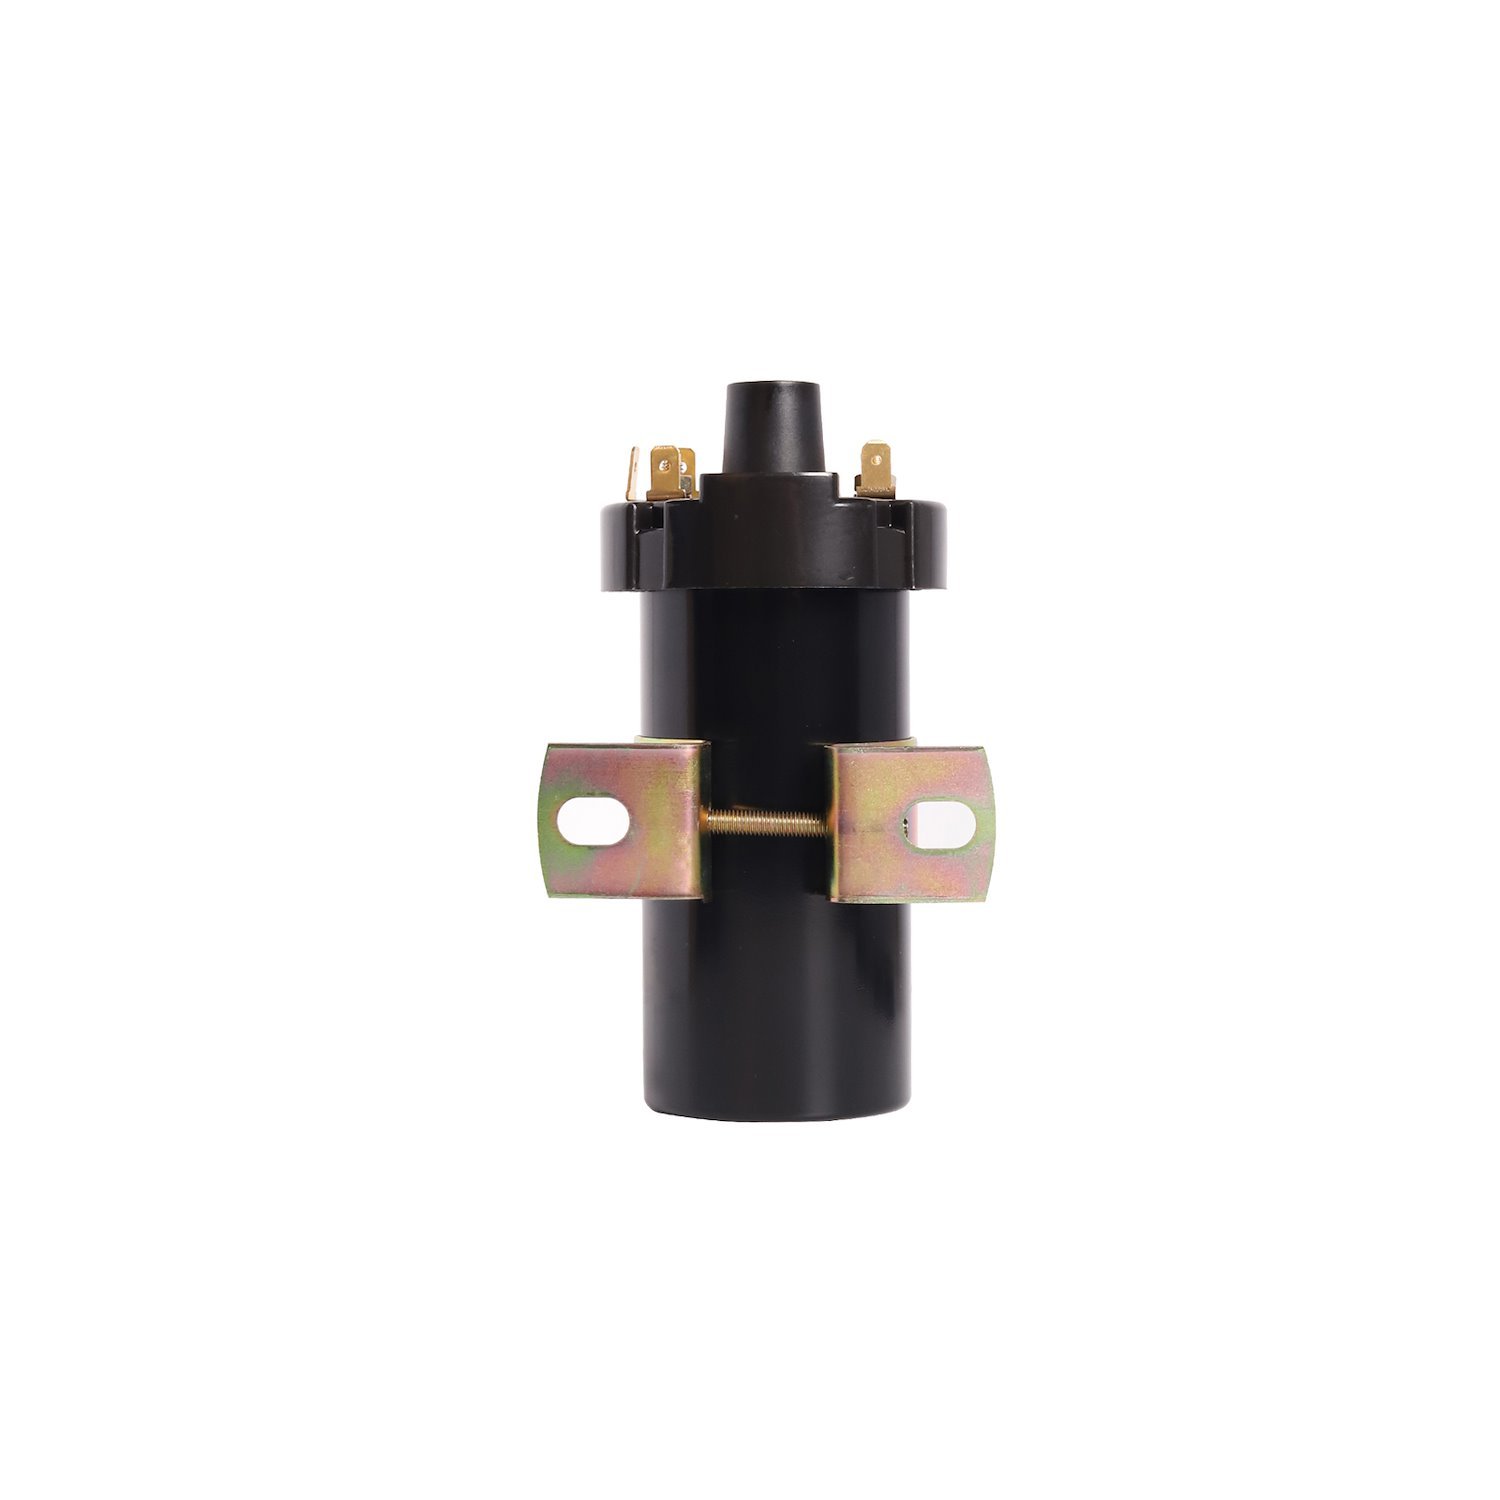 OE Replacement Ignition Coil for Volkswagen 1985-1990 Jetta,